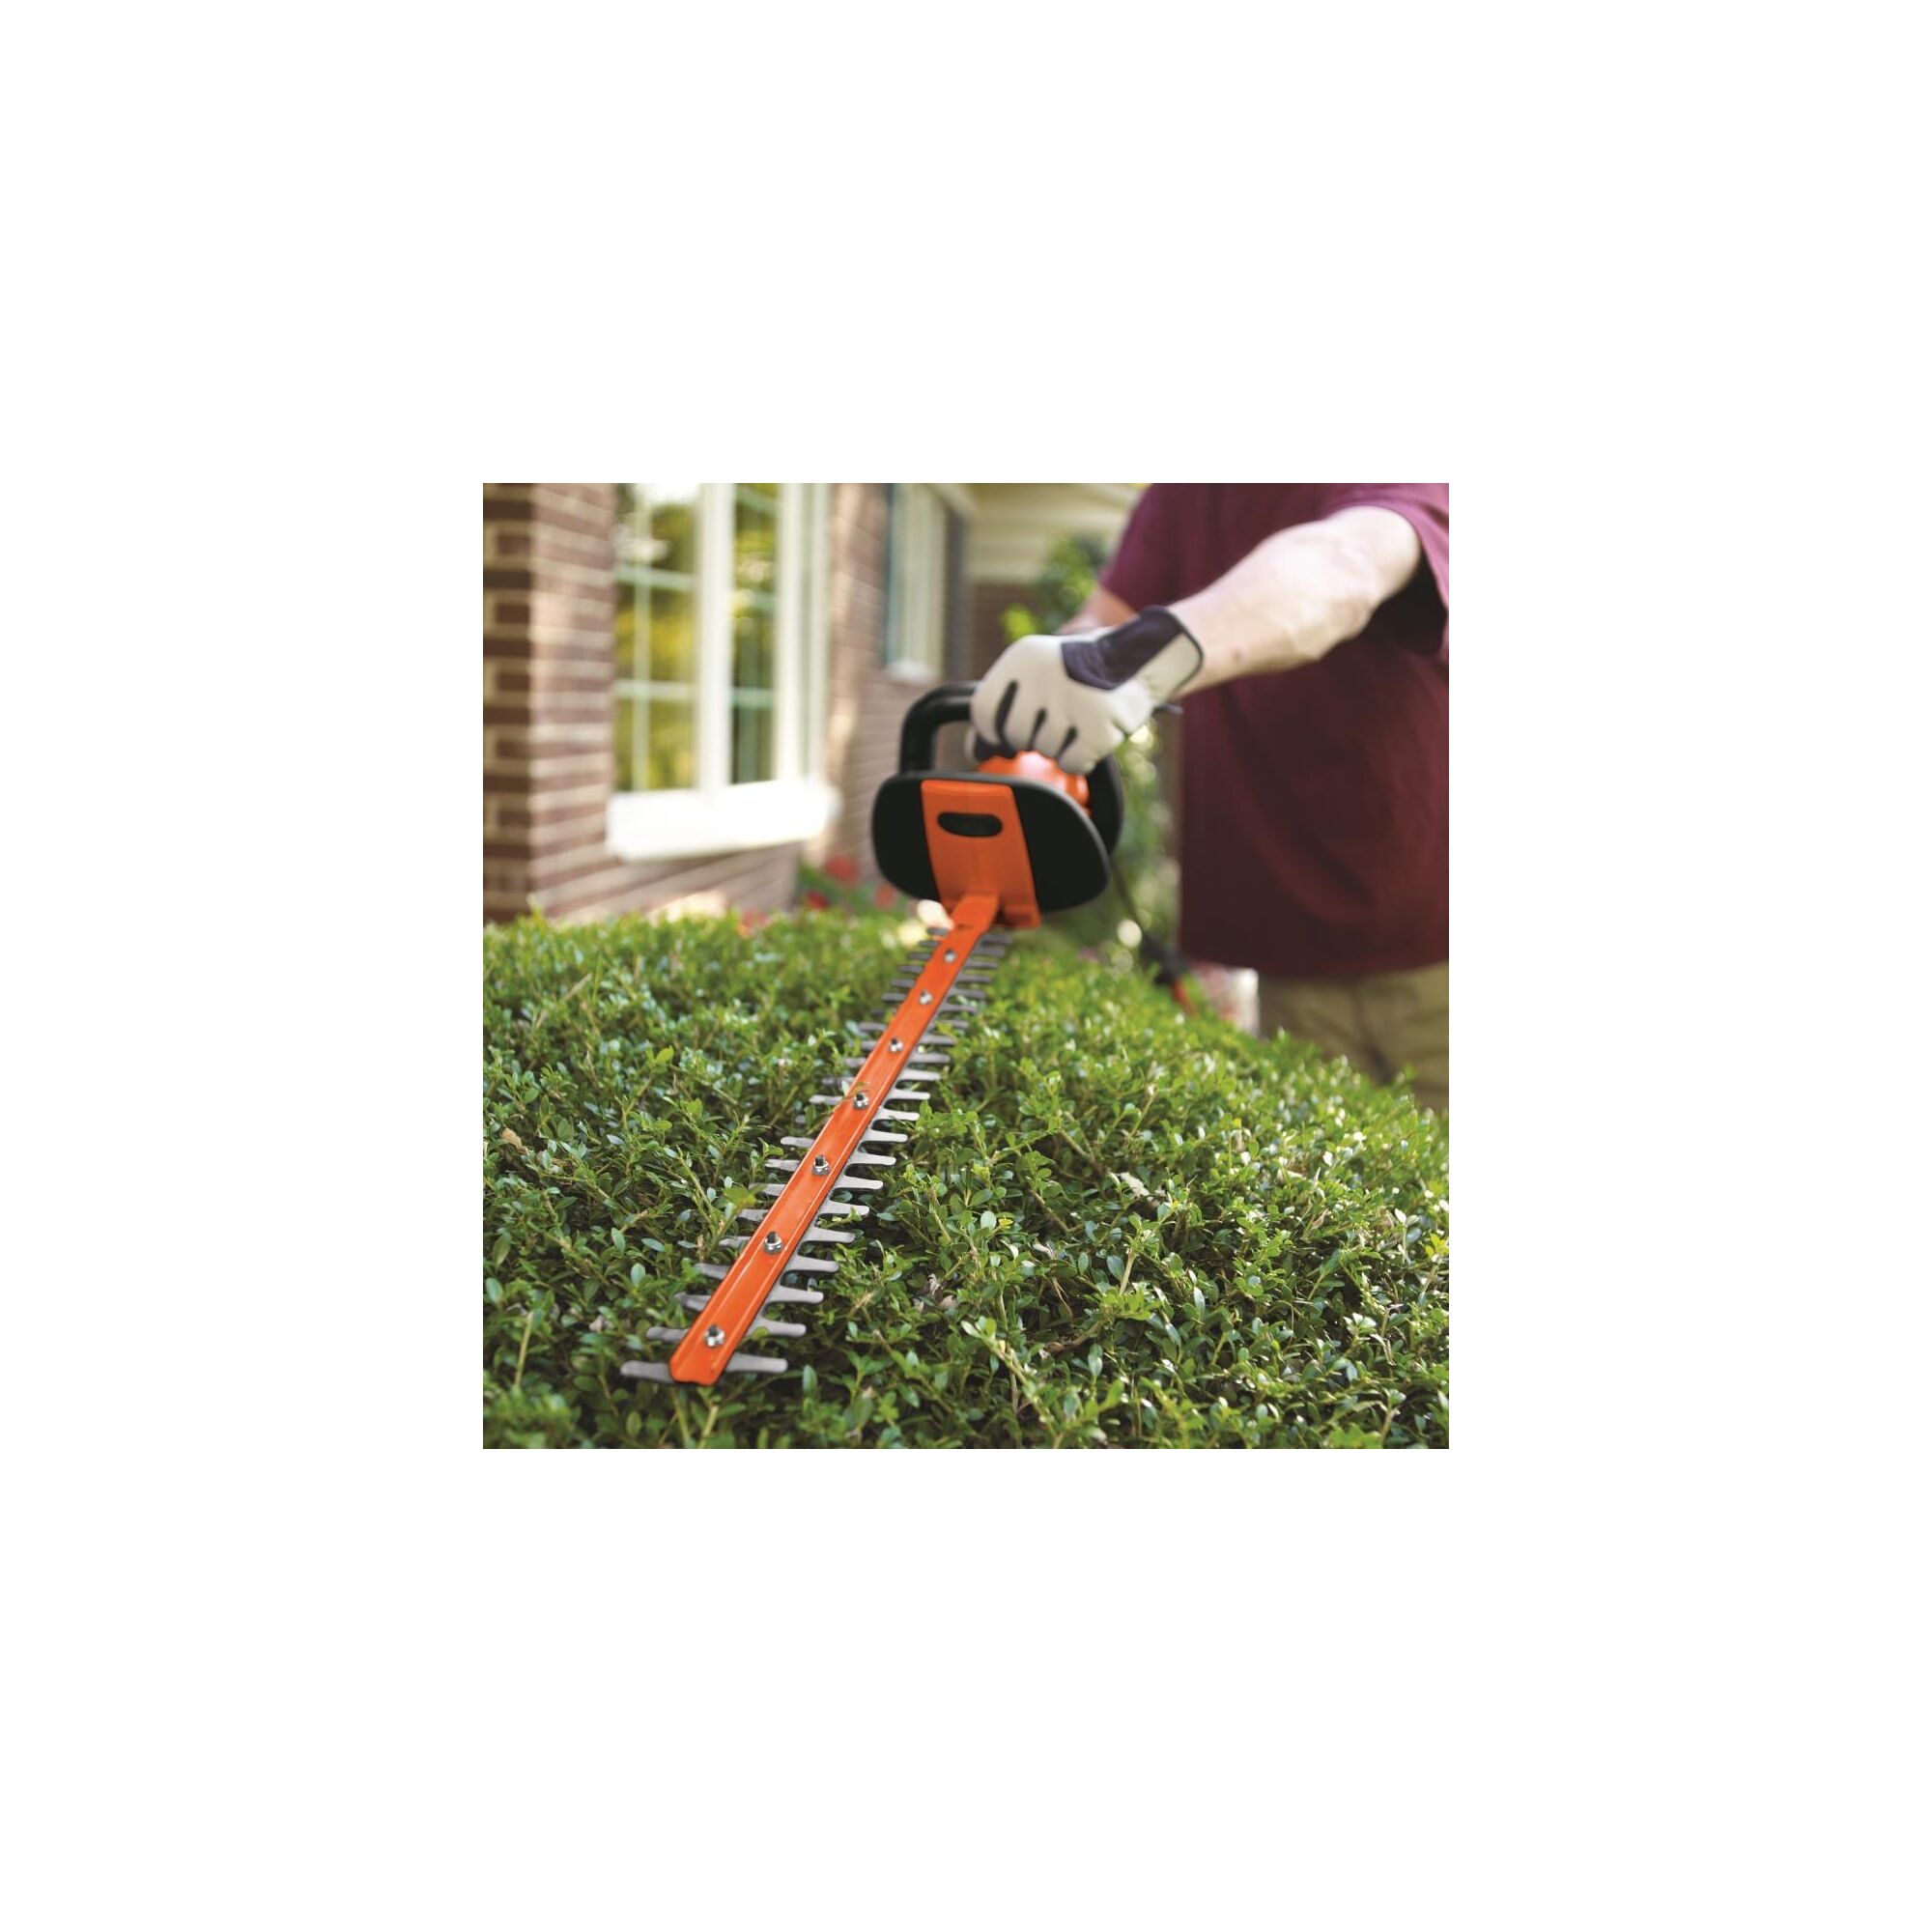 Person using hedge trimmer on bush outside a window